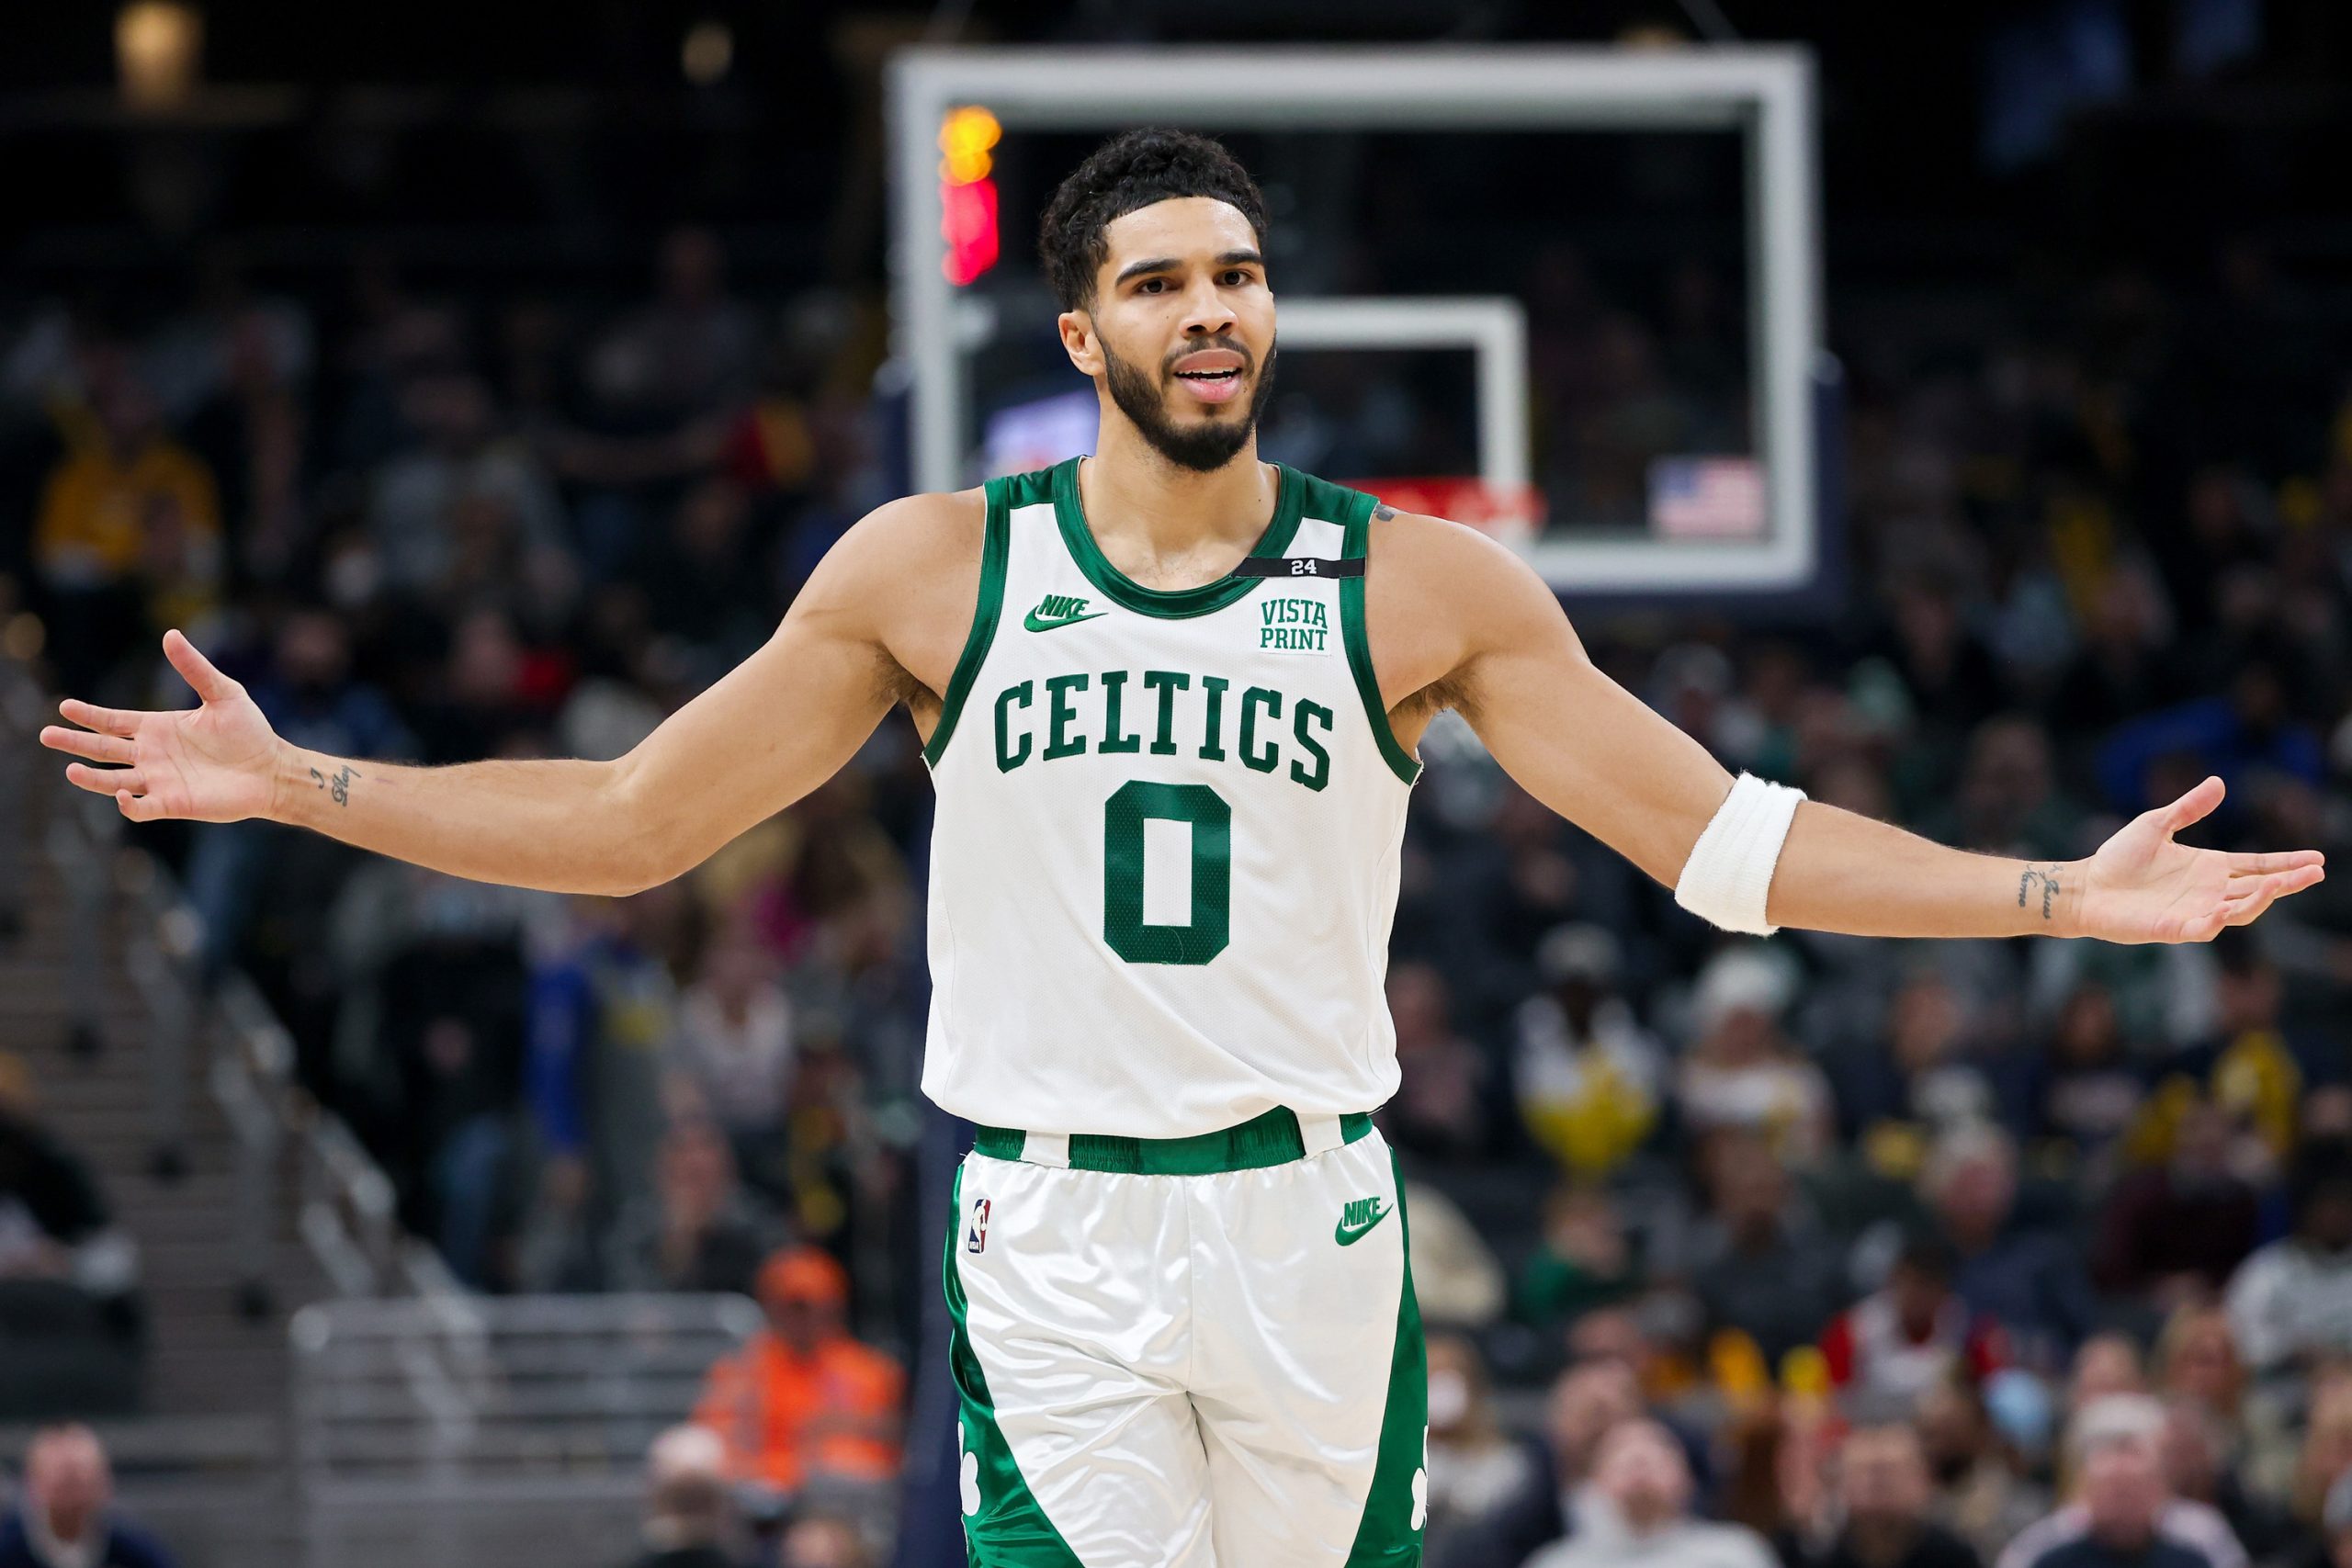 Jayson Tatum of the Boston Celtics reacts in the second quarter against the Indiana Pacers.